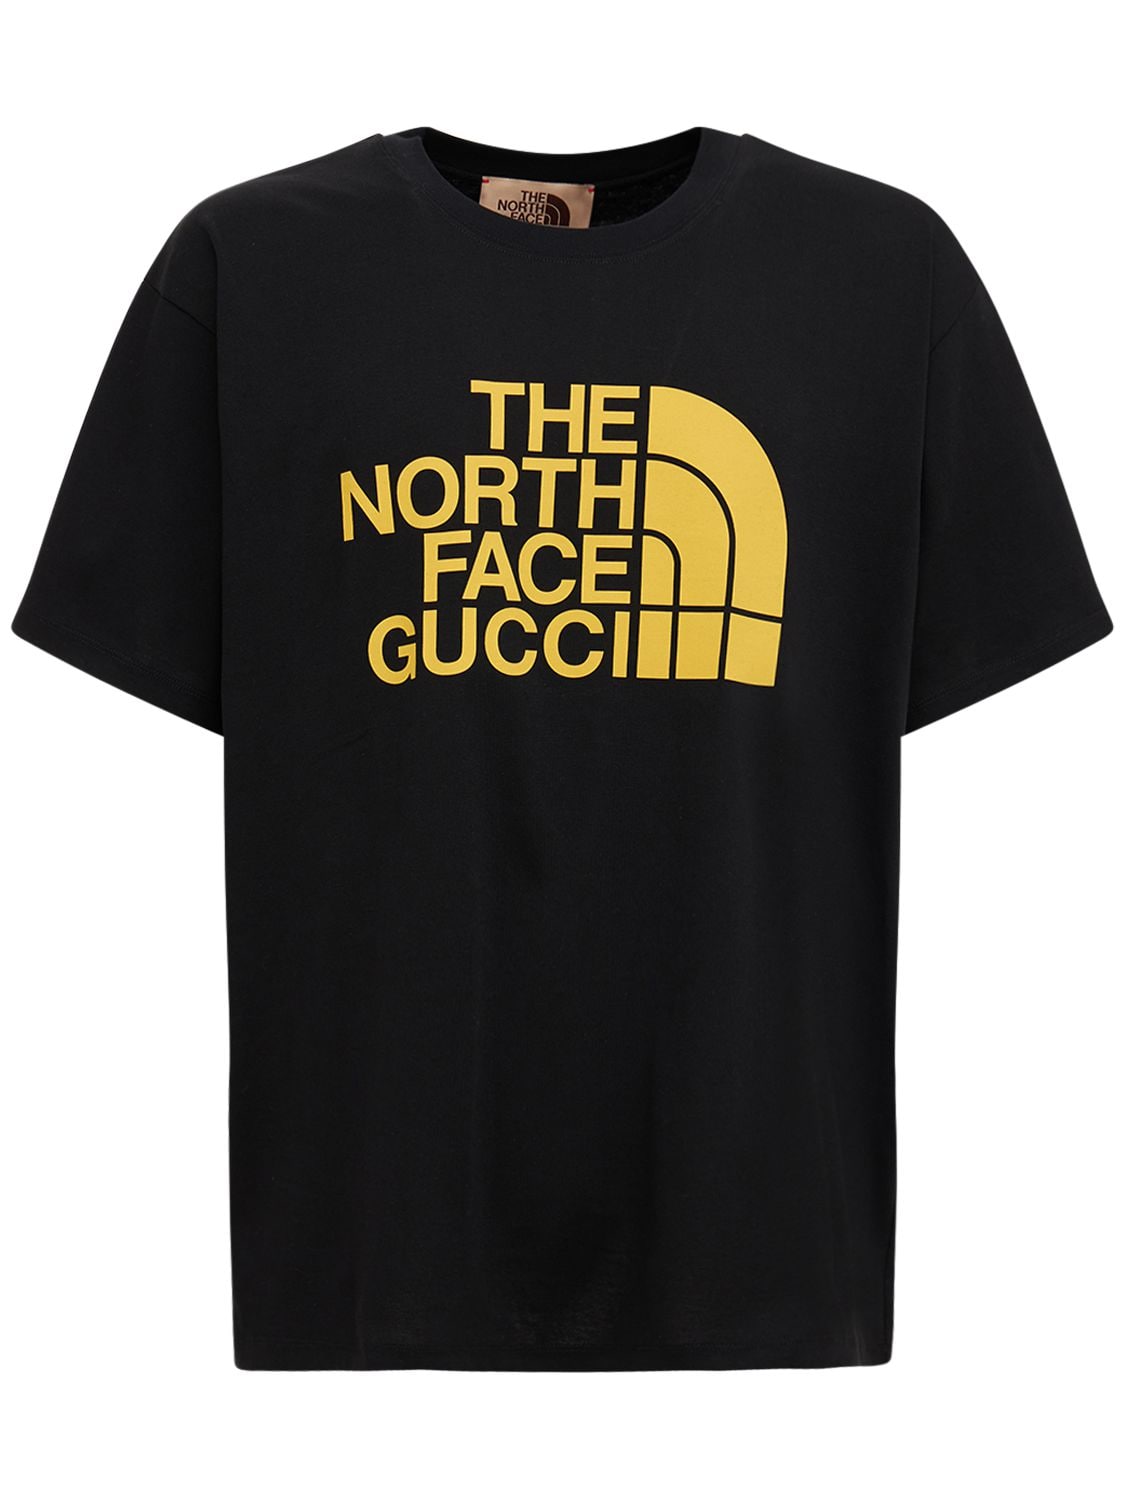 Gucci X The North Face T Shirt In Black Yellow Modesens